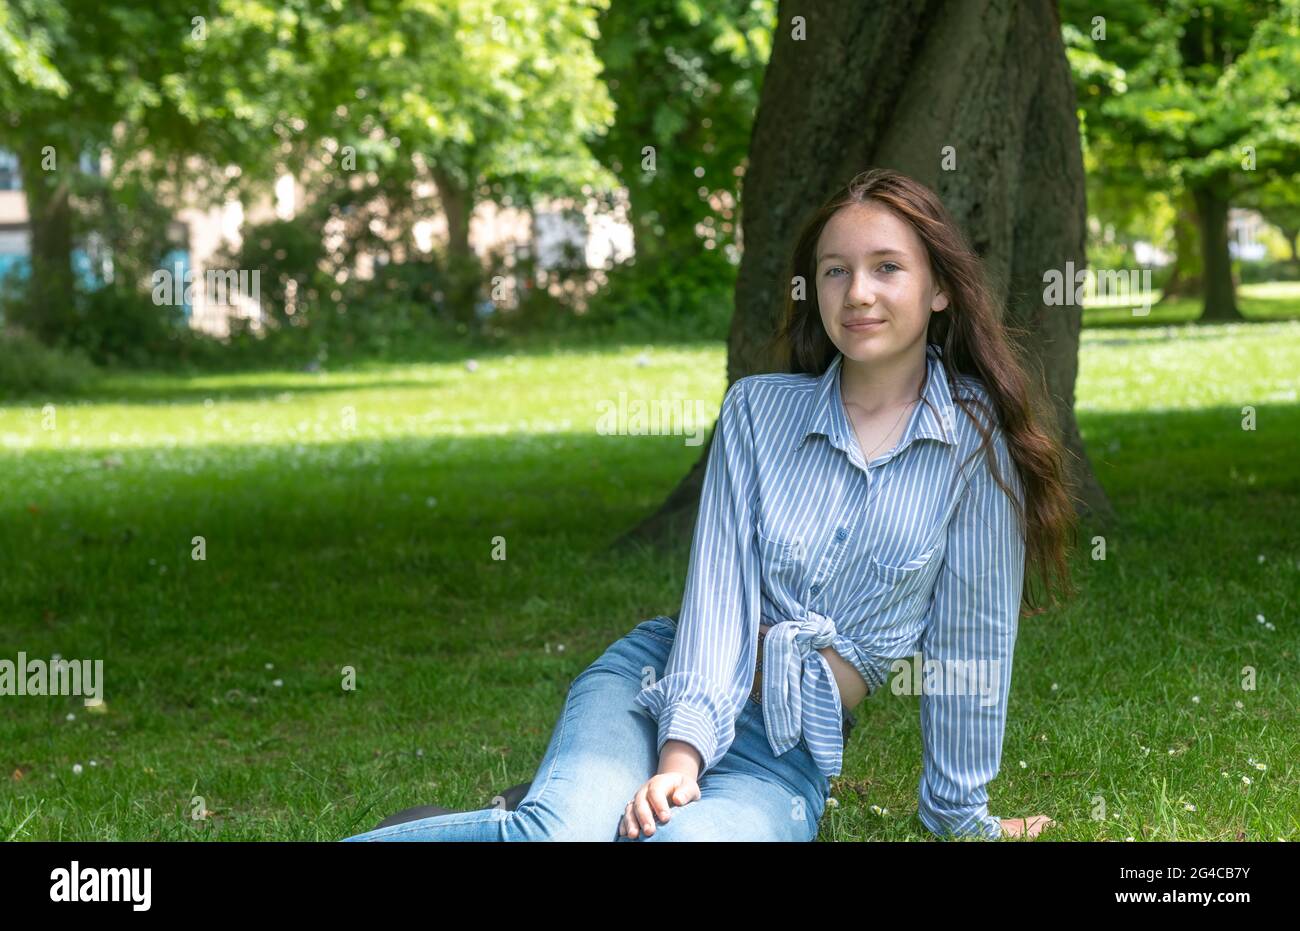 Young female in striped shirt looking at camera while resting on grassy lawn near tree in summer in park, copy space on left side blurred background Stock Photo